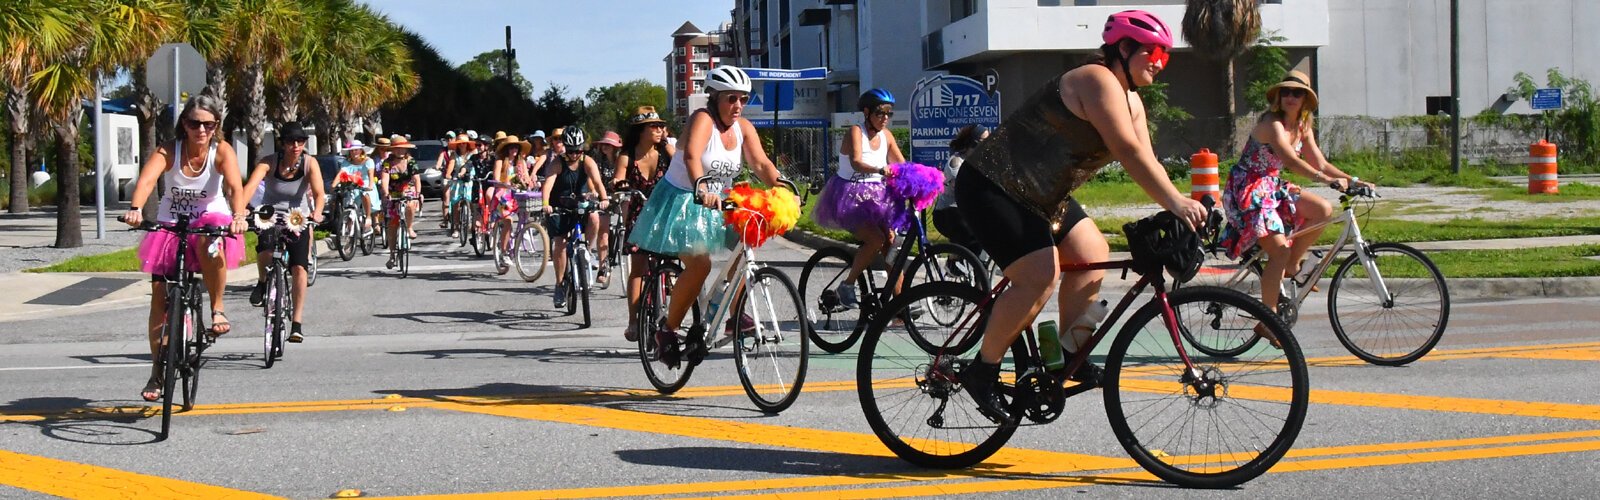 And off they go, all fancied up, their bikes decorated with feathered boas and flowers. This global event has evolved into a big movement promoting women’s visibility and personality.